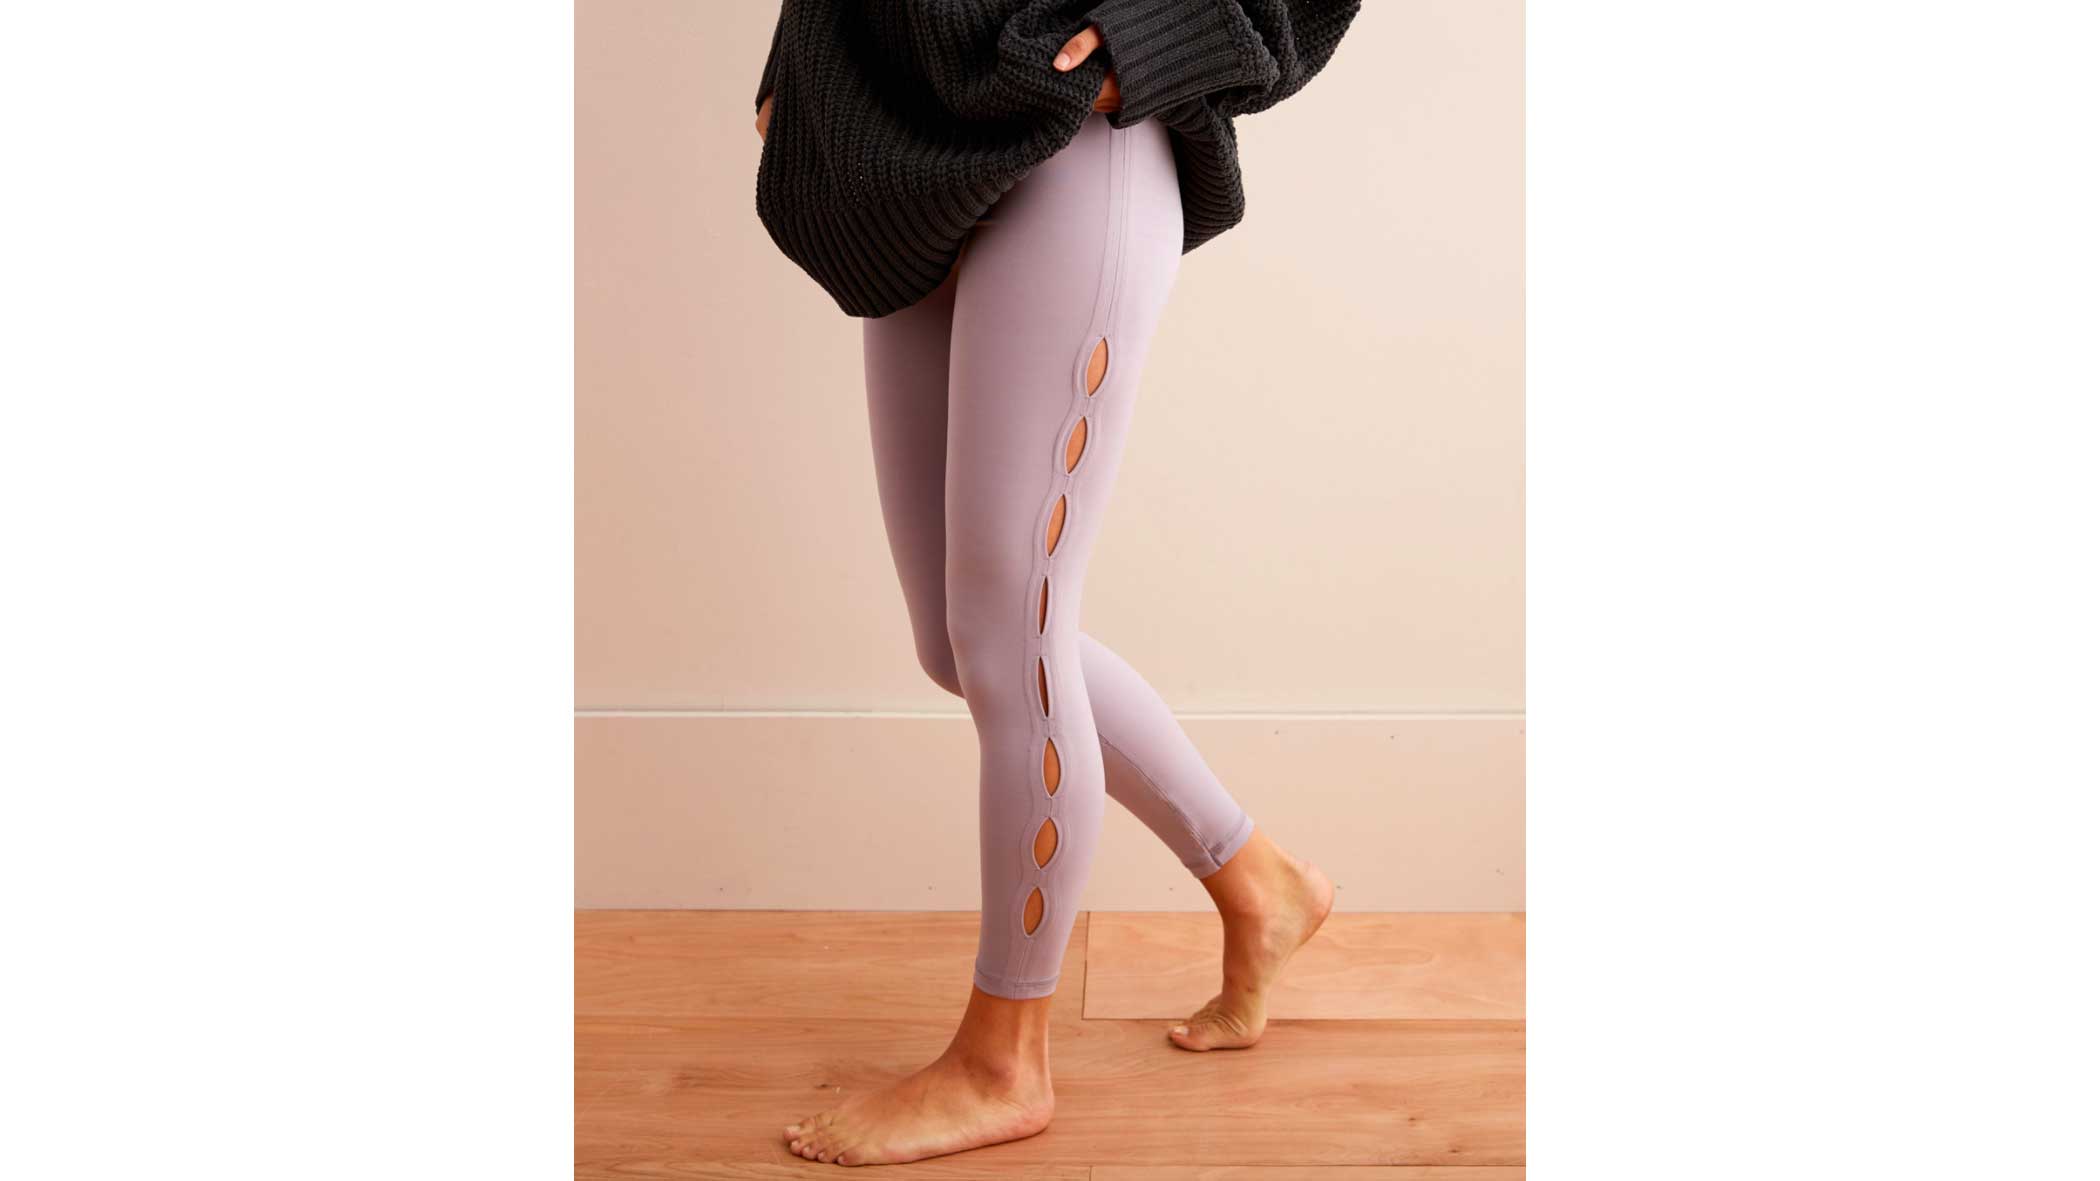 Womens Hip Lifting Yoga Gym Leggings With Pockets For Fitness, Running, And  Gym Workouts Push Up, Sporty, Affordable H1221 From Mengyang10, $7.11 |  DHgate.Com